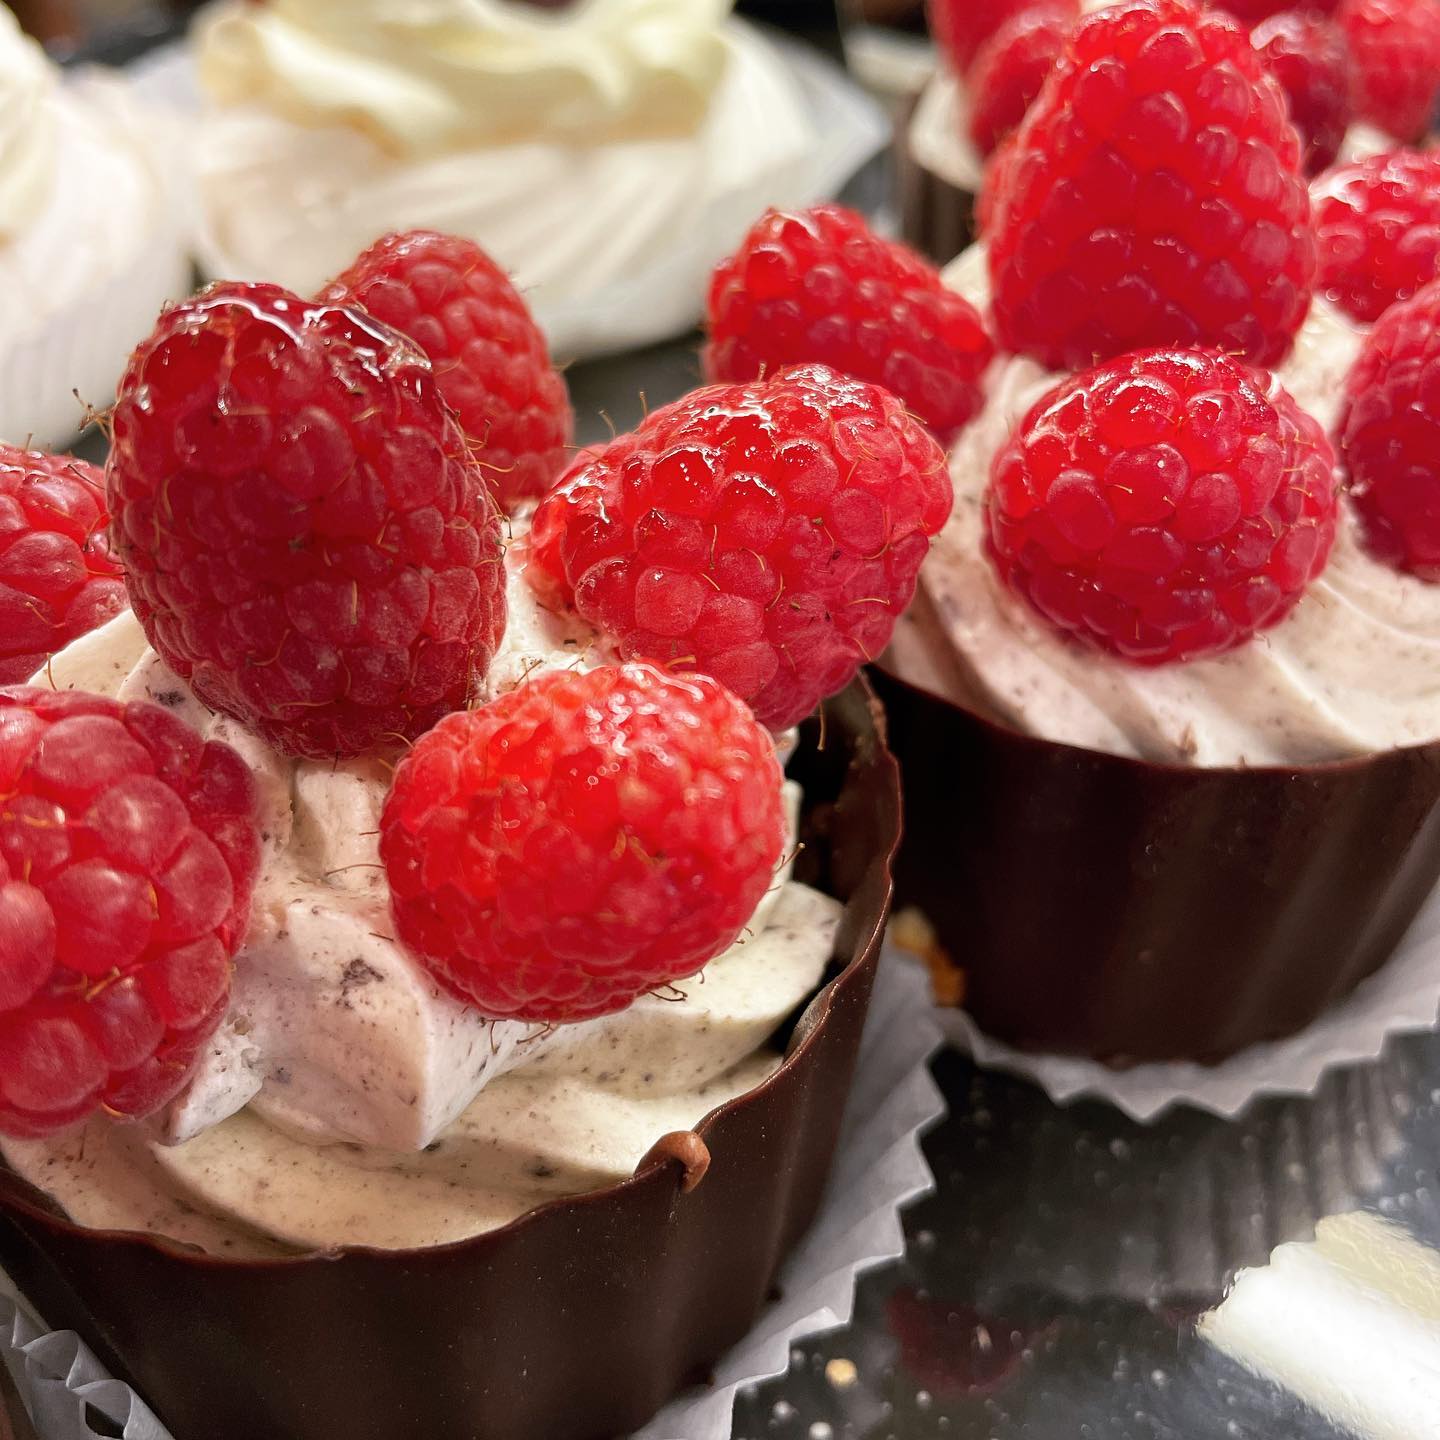 Have you tried our new Chocolate Raspberry Mousse Cups? 🍓Pop in over the weekend to grab a coffee and a little treat! 

#connemara #clifden #wildatlanticway #bakery #pastry #cafe